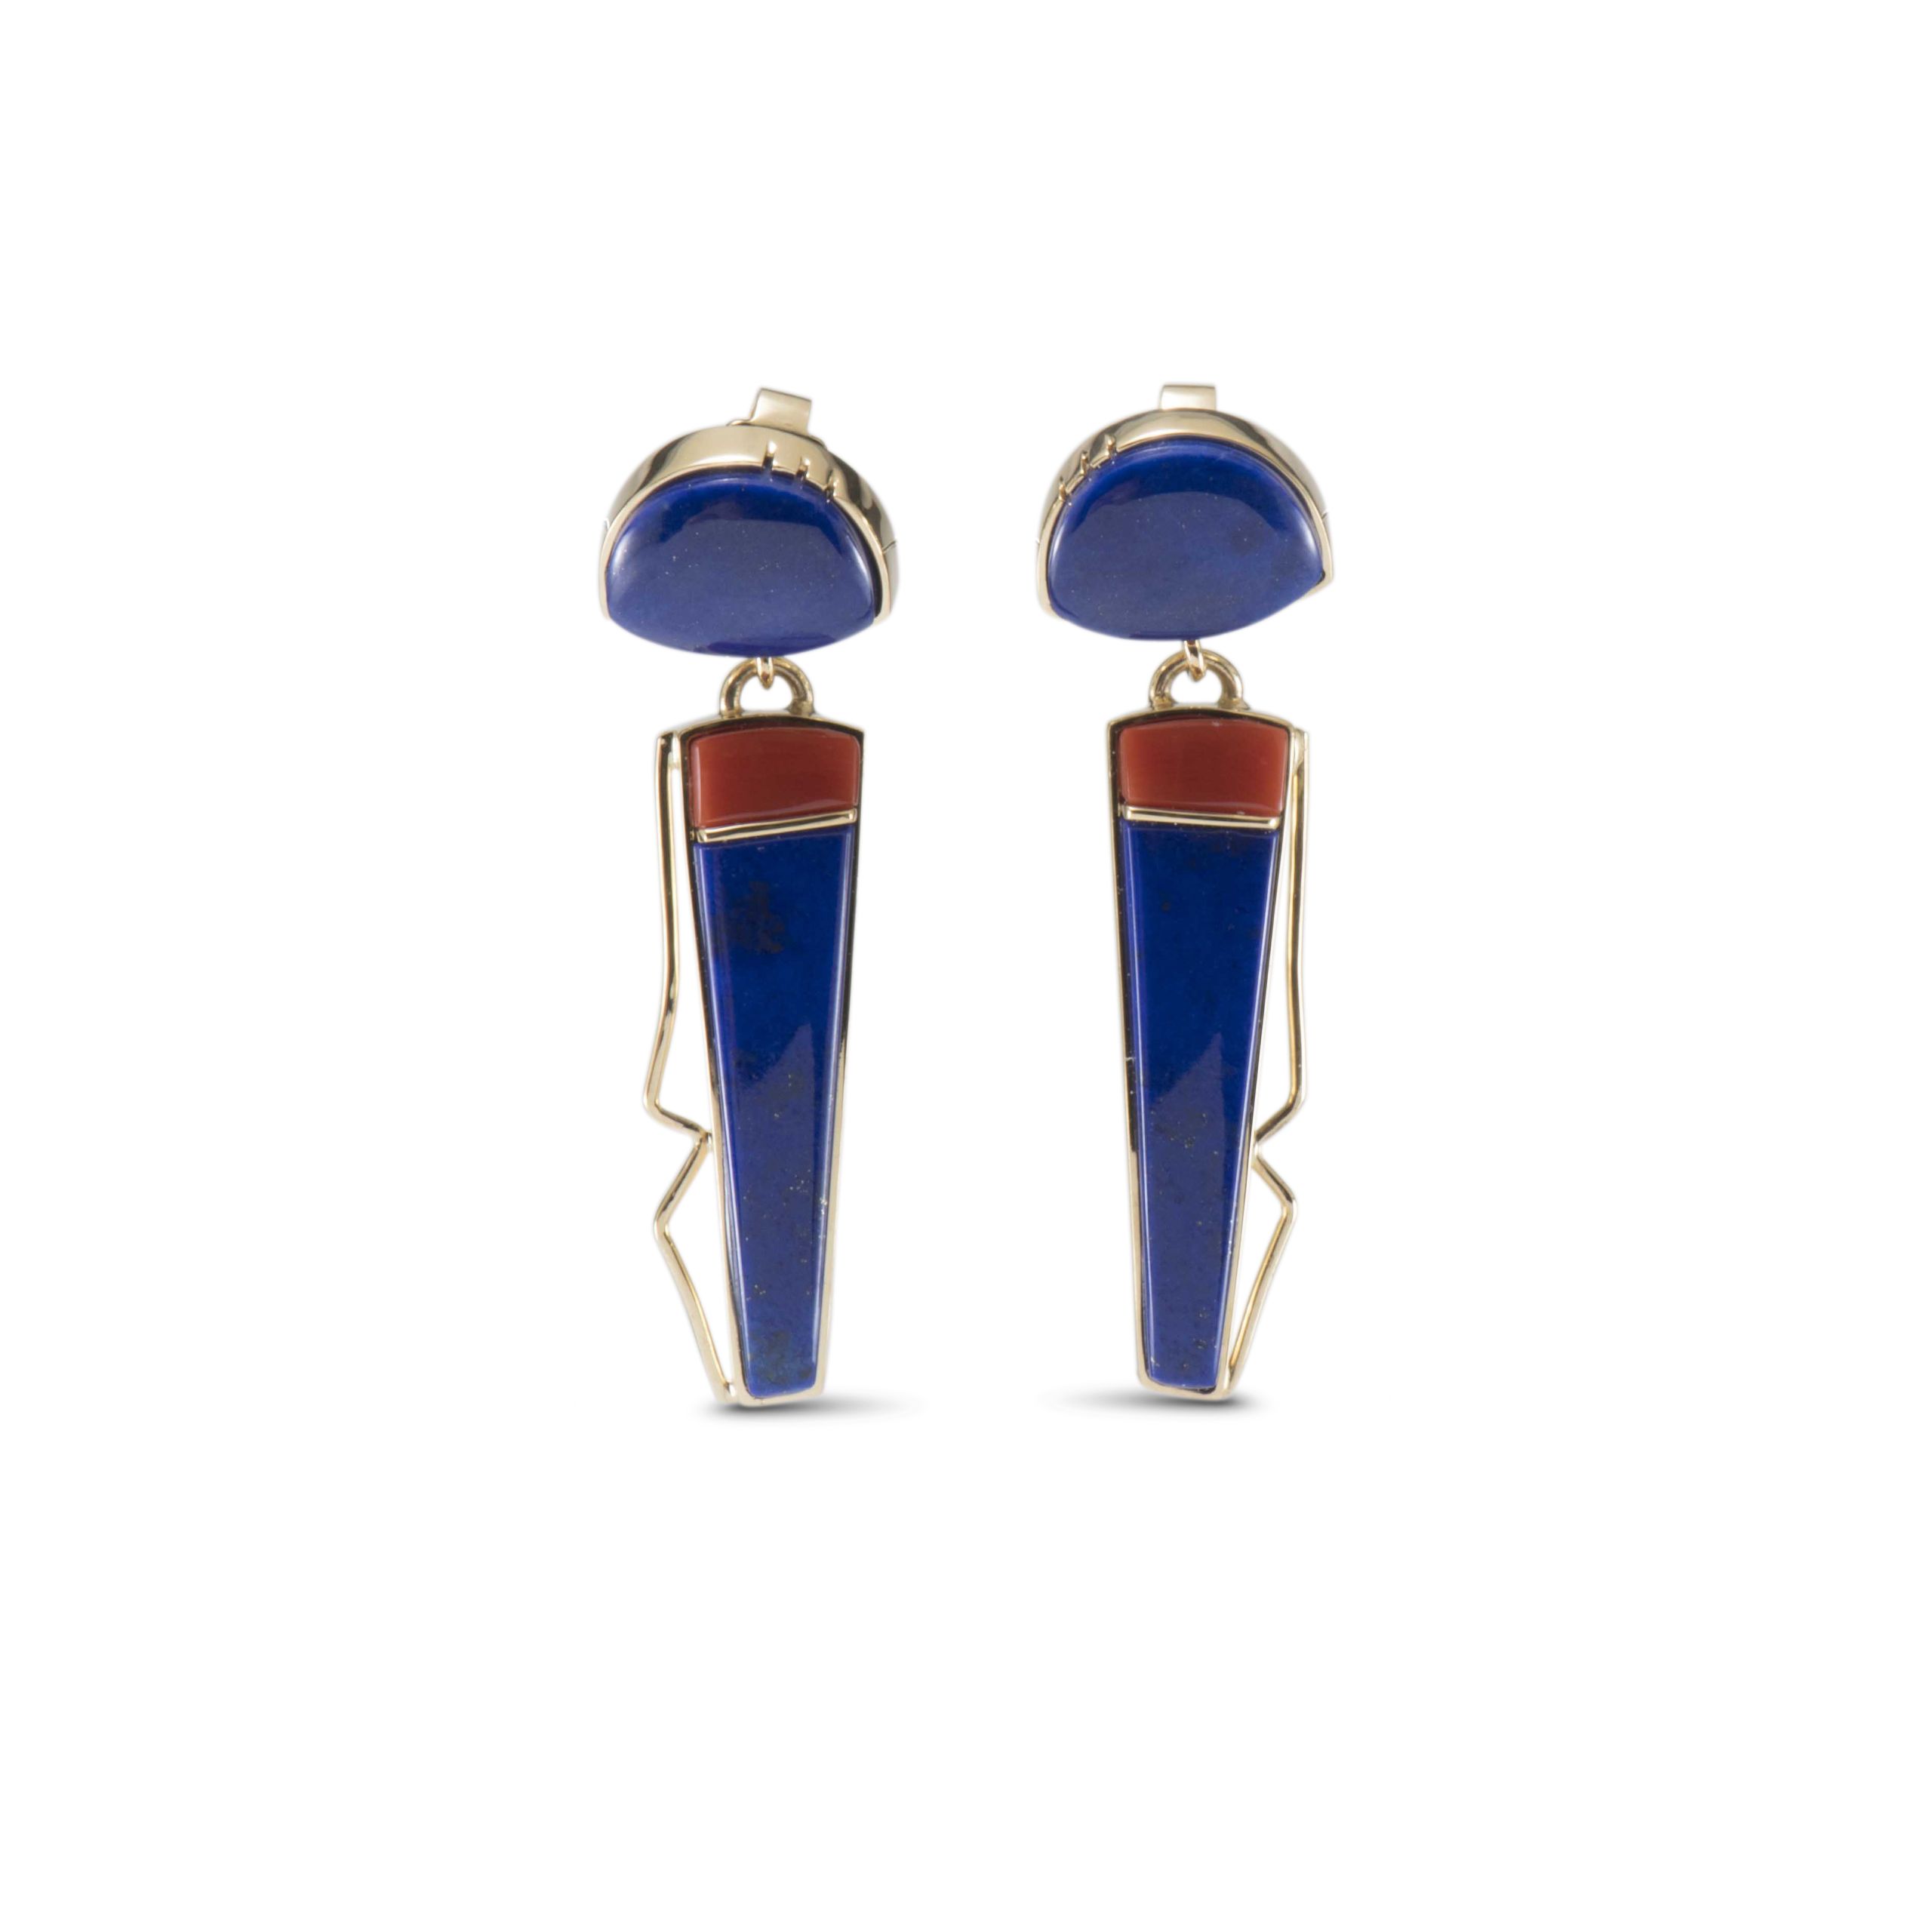 Richard Chavez 18kt Gold Earrings with Lapis and Coral